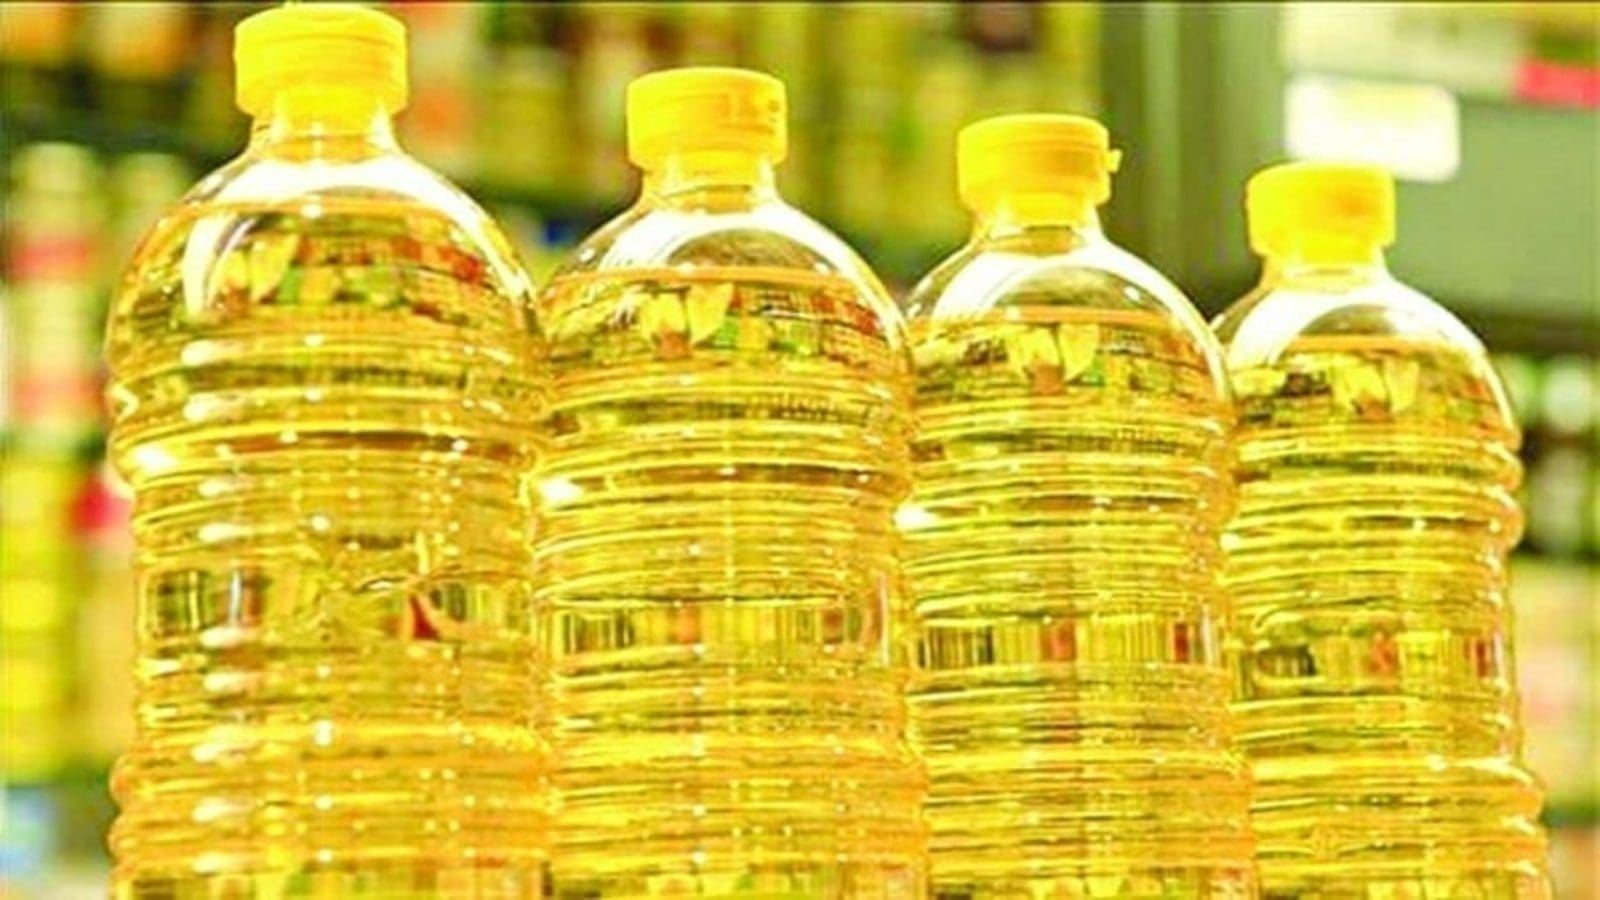 Tanzania announces 10% edible oil import duty hike, eyes to be self-sufficient in wheat by 2025/26